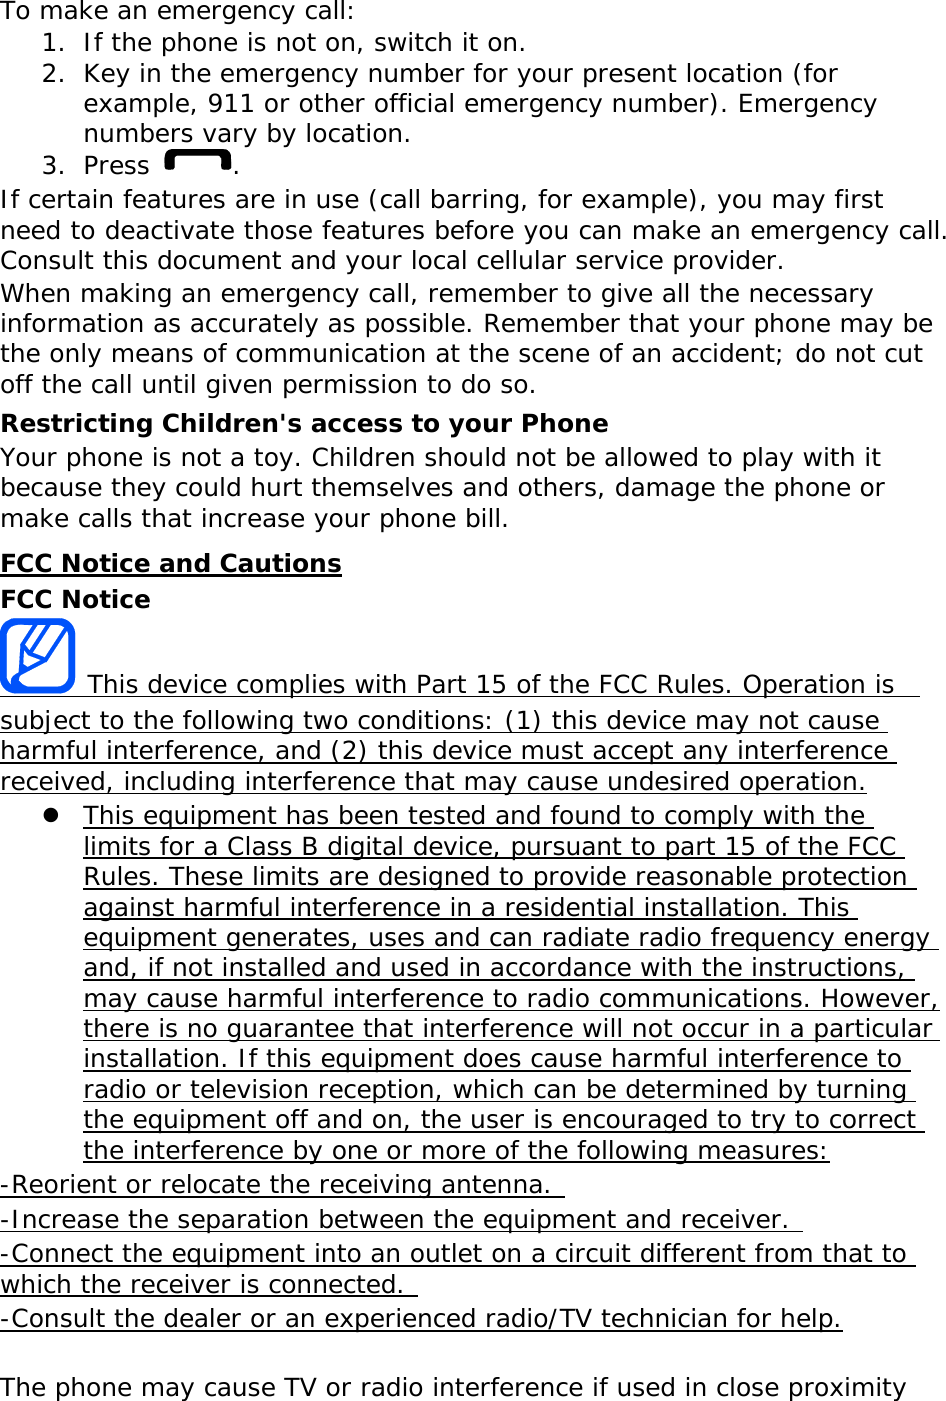 To make an emergency call: 1. If the phone is not on, switch it on. 2. Key in the emergency number for your present location (for example, 911 or other official emergency number). Emergency numbers vary by location. 3. Press  . If certain features are in use (call barring, for example), you may first need to deactivate those features before you can make an emergency call. Consult this document and your local cellular service provider. When making an emergency call, remember to give all the necessary information as accurately as possible. Remember that your phone may be the only means of communication at the scene of an accident; do not cut off the call until given permission to do so. Restricting Children&apos;s access to your Phone Your phone is not a toy. Children should not be allowed to play with it because they could hurt themselves and others, damage the phone or make calls that increase your phone bill. FCC Notice and Cautions FCC Notice  This device complies with Part 15 of the FCC Rules. Operation is  subject to the following two conditions: (1) this device may not cause harmful interference, and (2) this device must accept any interference received, including interference that may cause undesired operation. z This equipment has been tested and found to comply with the limits for a Class B digital device, pursuant to part 15 of the FCC Rules. These limits are designed to provide reasonable protection against harmful interference in a residential installation. This equipment generates, uses and can radiate radio frequency energy and, if not installed and used in accordance with the instructions, may cause harmful interference to radio communications. However, there is no guarantee that interference will not occur in a particular installation. If this equipment does cause harmful interference to radio or television reception, which can be determined by turning the equipment off and on, the user is encouraged to try to correct the interference by one or more of the following measures: -Reorient or relocate the receiving antenna.  -Increase the separation between the equipment and receiver.  -Connect the equipment into an outlet on a circuit different from that to which the receiver is connected.  -Consult the dealer or an experienced radio/TV technician for help.  The phone may cause TV or radio interference if used in close proximity 